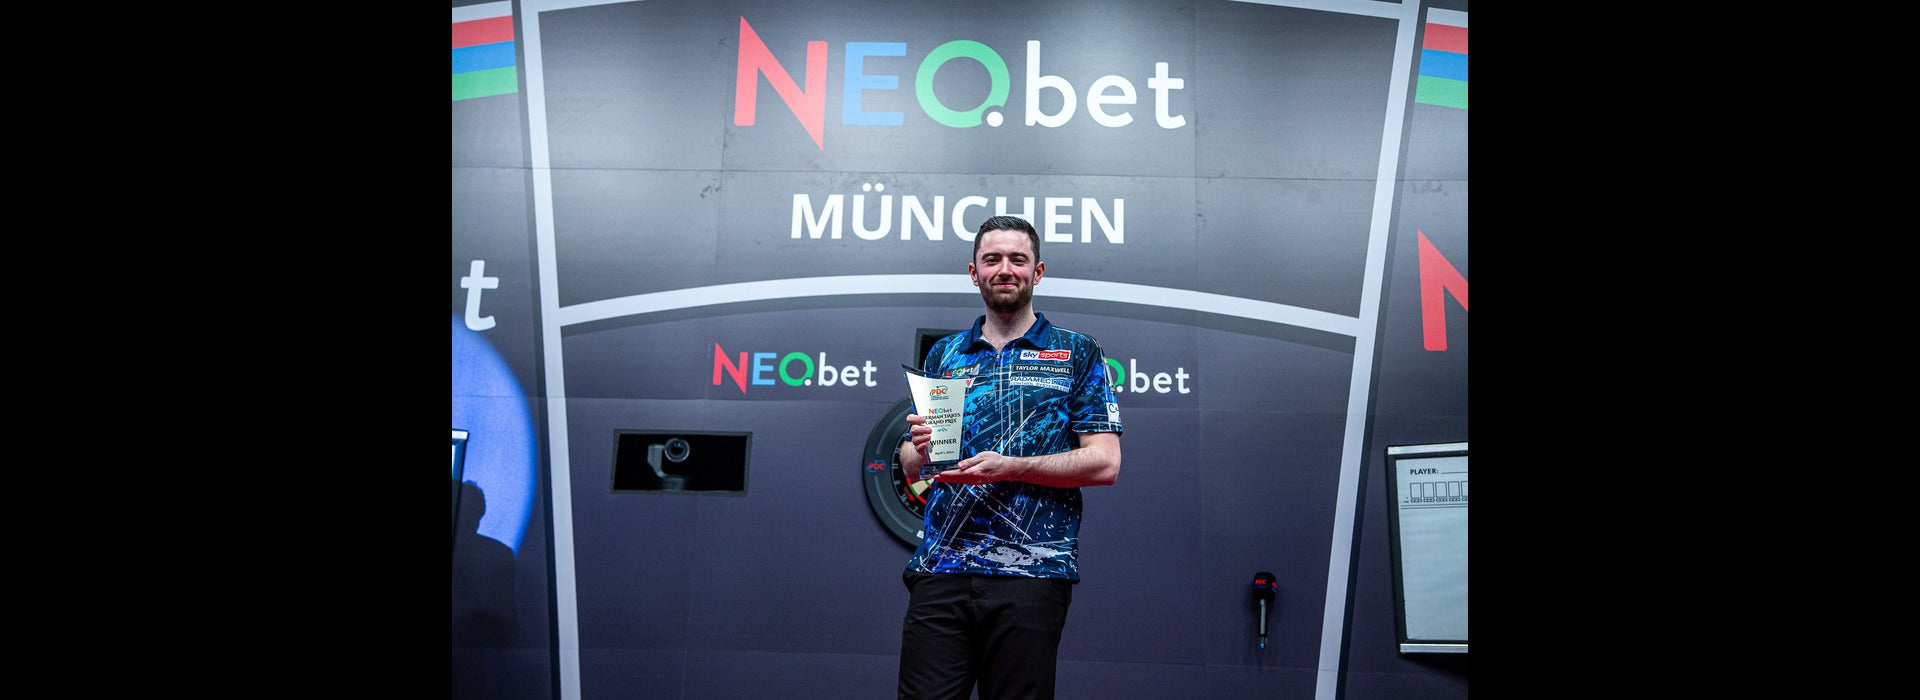 Incredible Humphries storms to NEO.bet German Darts Grand Prix title